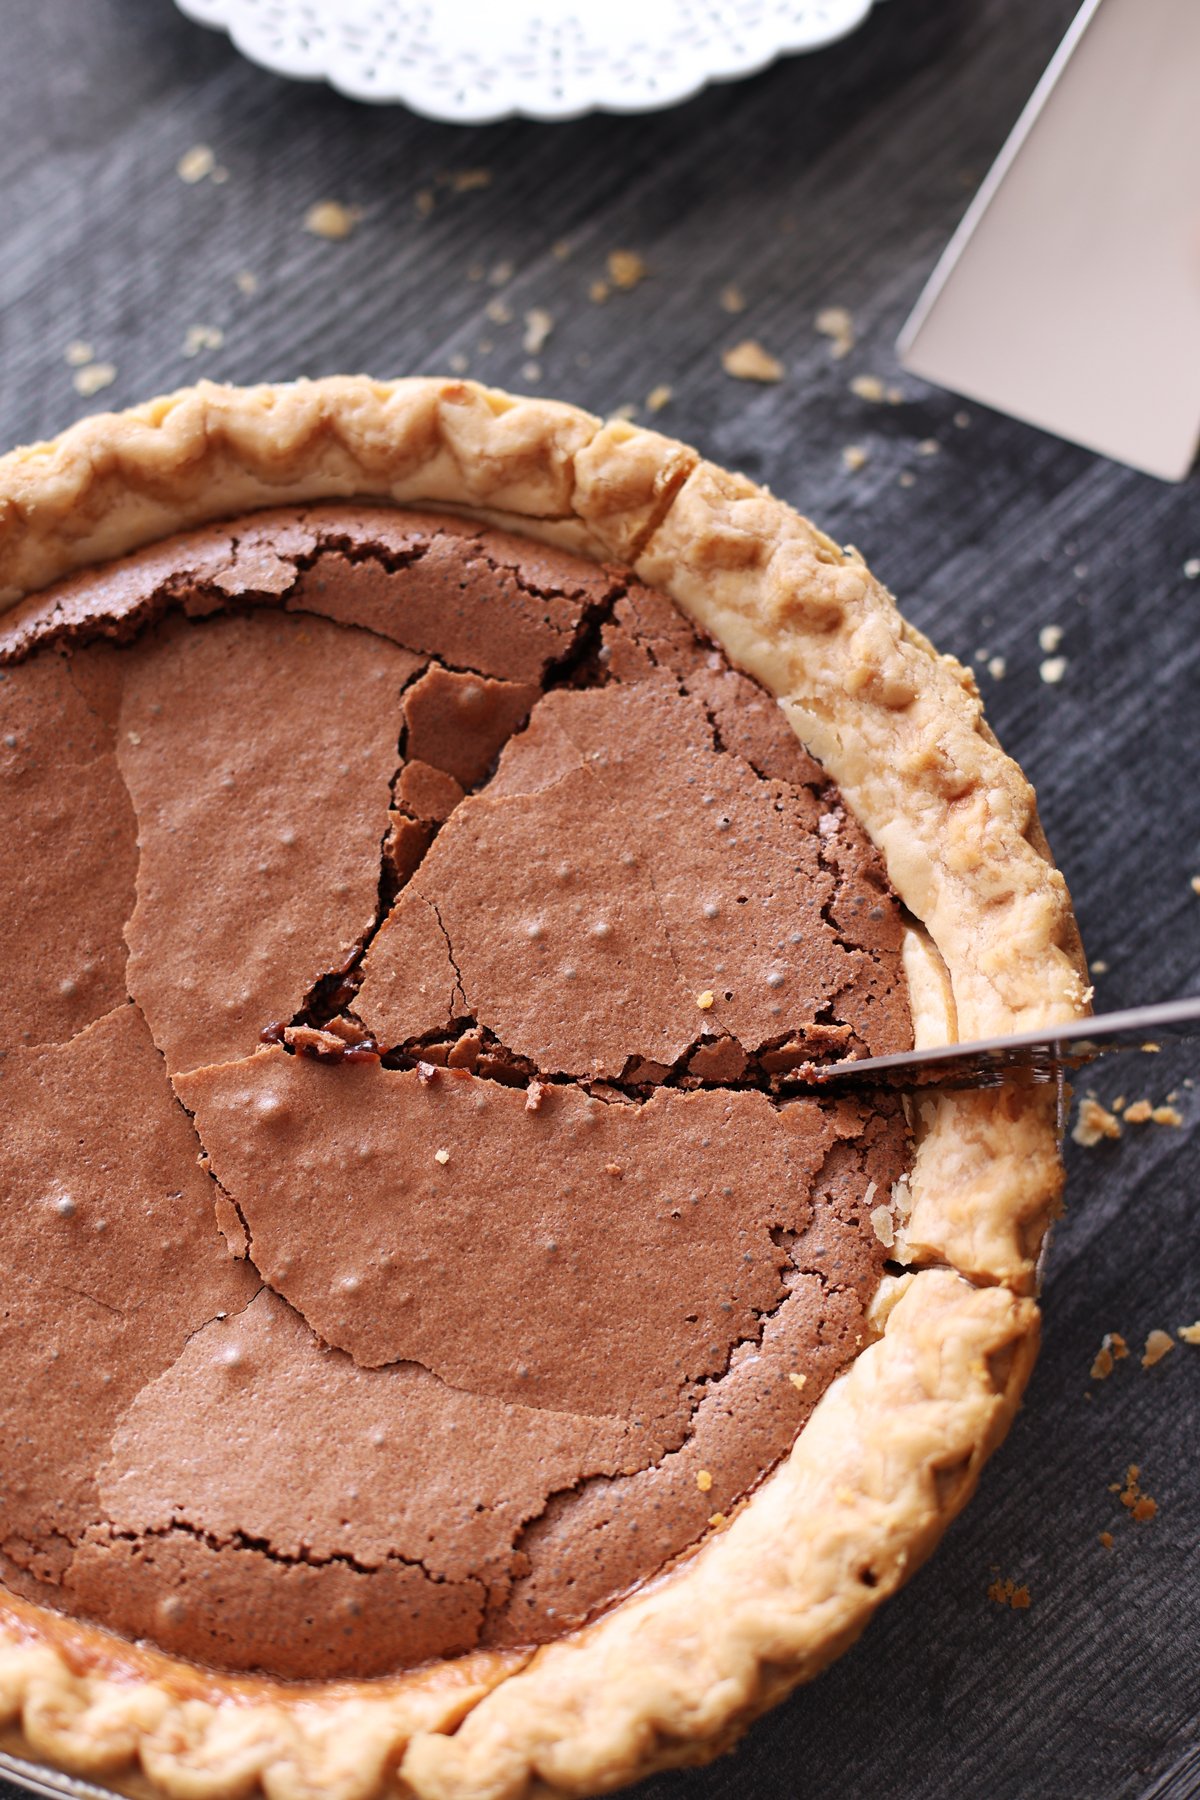 Person slicing a chocolate pie.